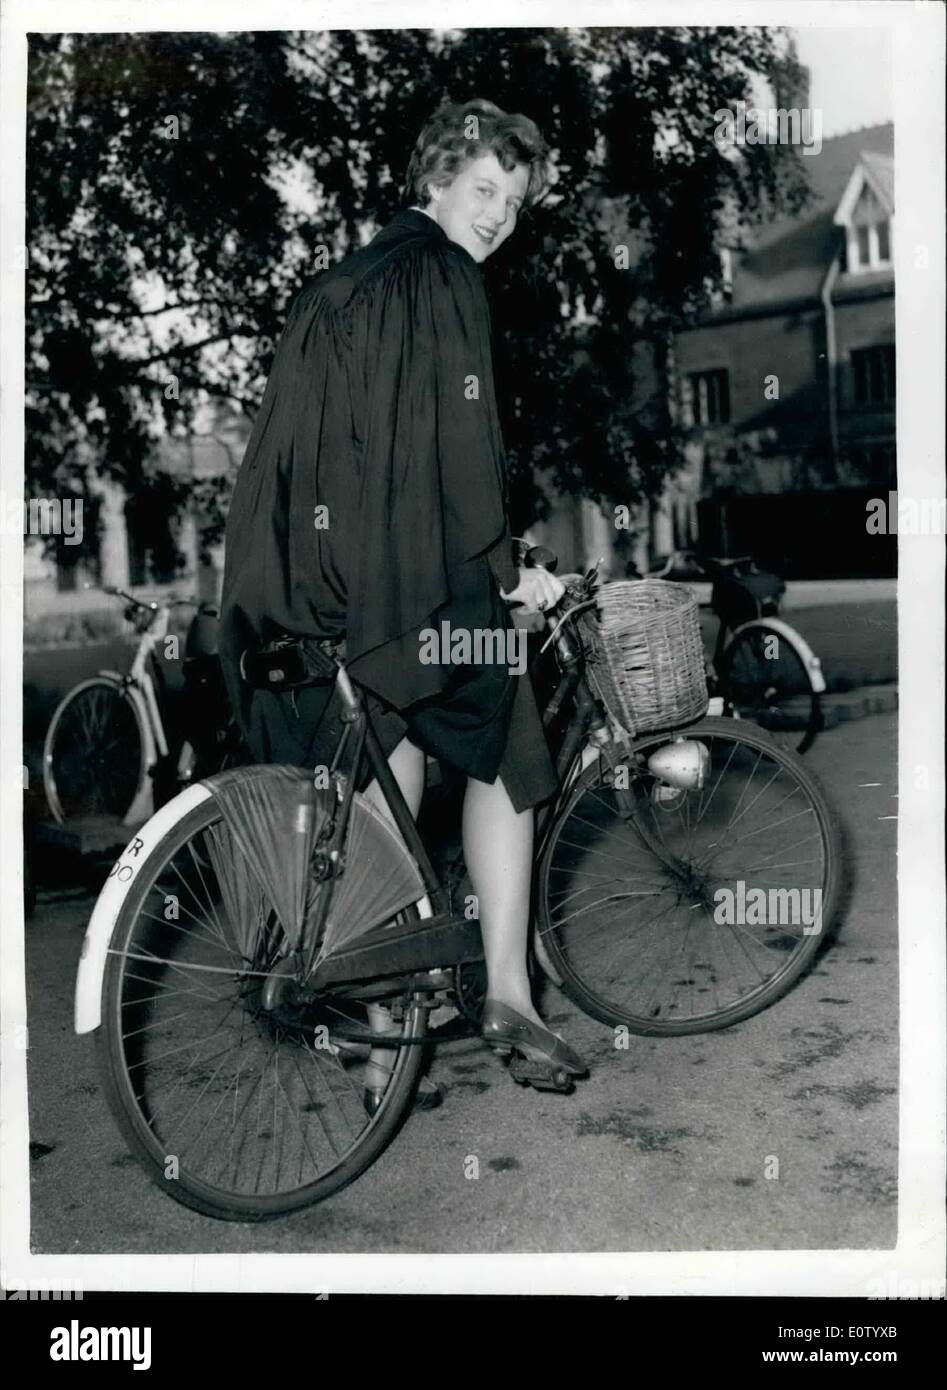 Oct. 10, 1960 - Princess Margrethe Of Denmark - Goes Cycling In Cambridge: Princess Margarethe 20 years old heiress to the Danish throne - started a year's study at Girton, Cambridge - today in archeology and international Law...The Princess, who is well known for her cycling trips around her native Copenhagen went for a cycle ride in Cambridge this afternoon. Photo Shows Princess Margrethe - while cycling in Cambridge this afternoon. Stock Photo